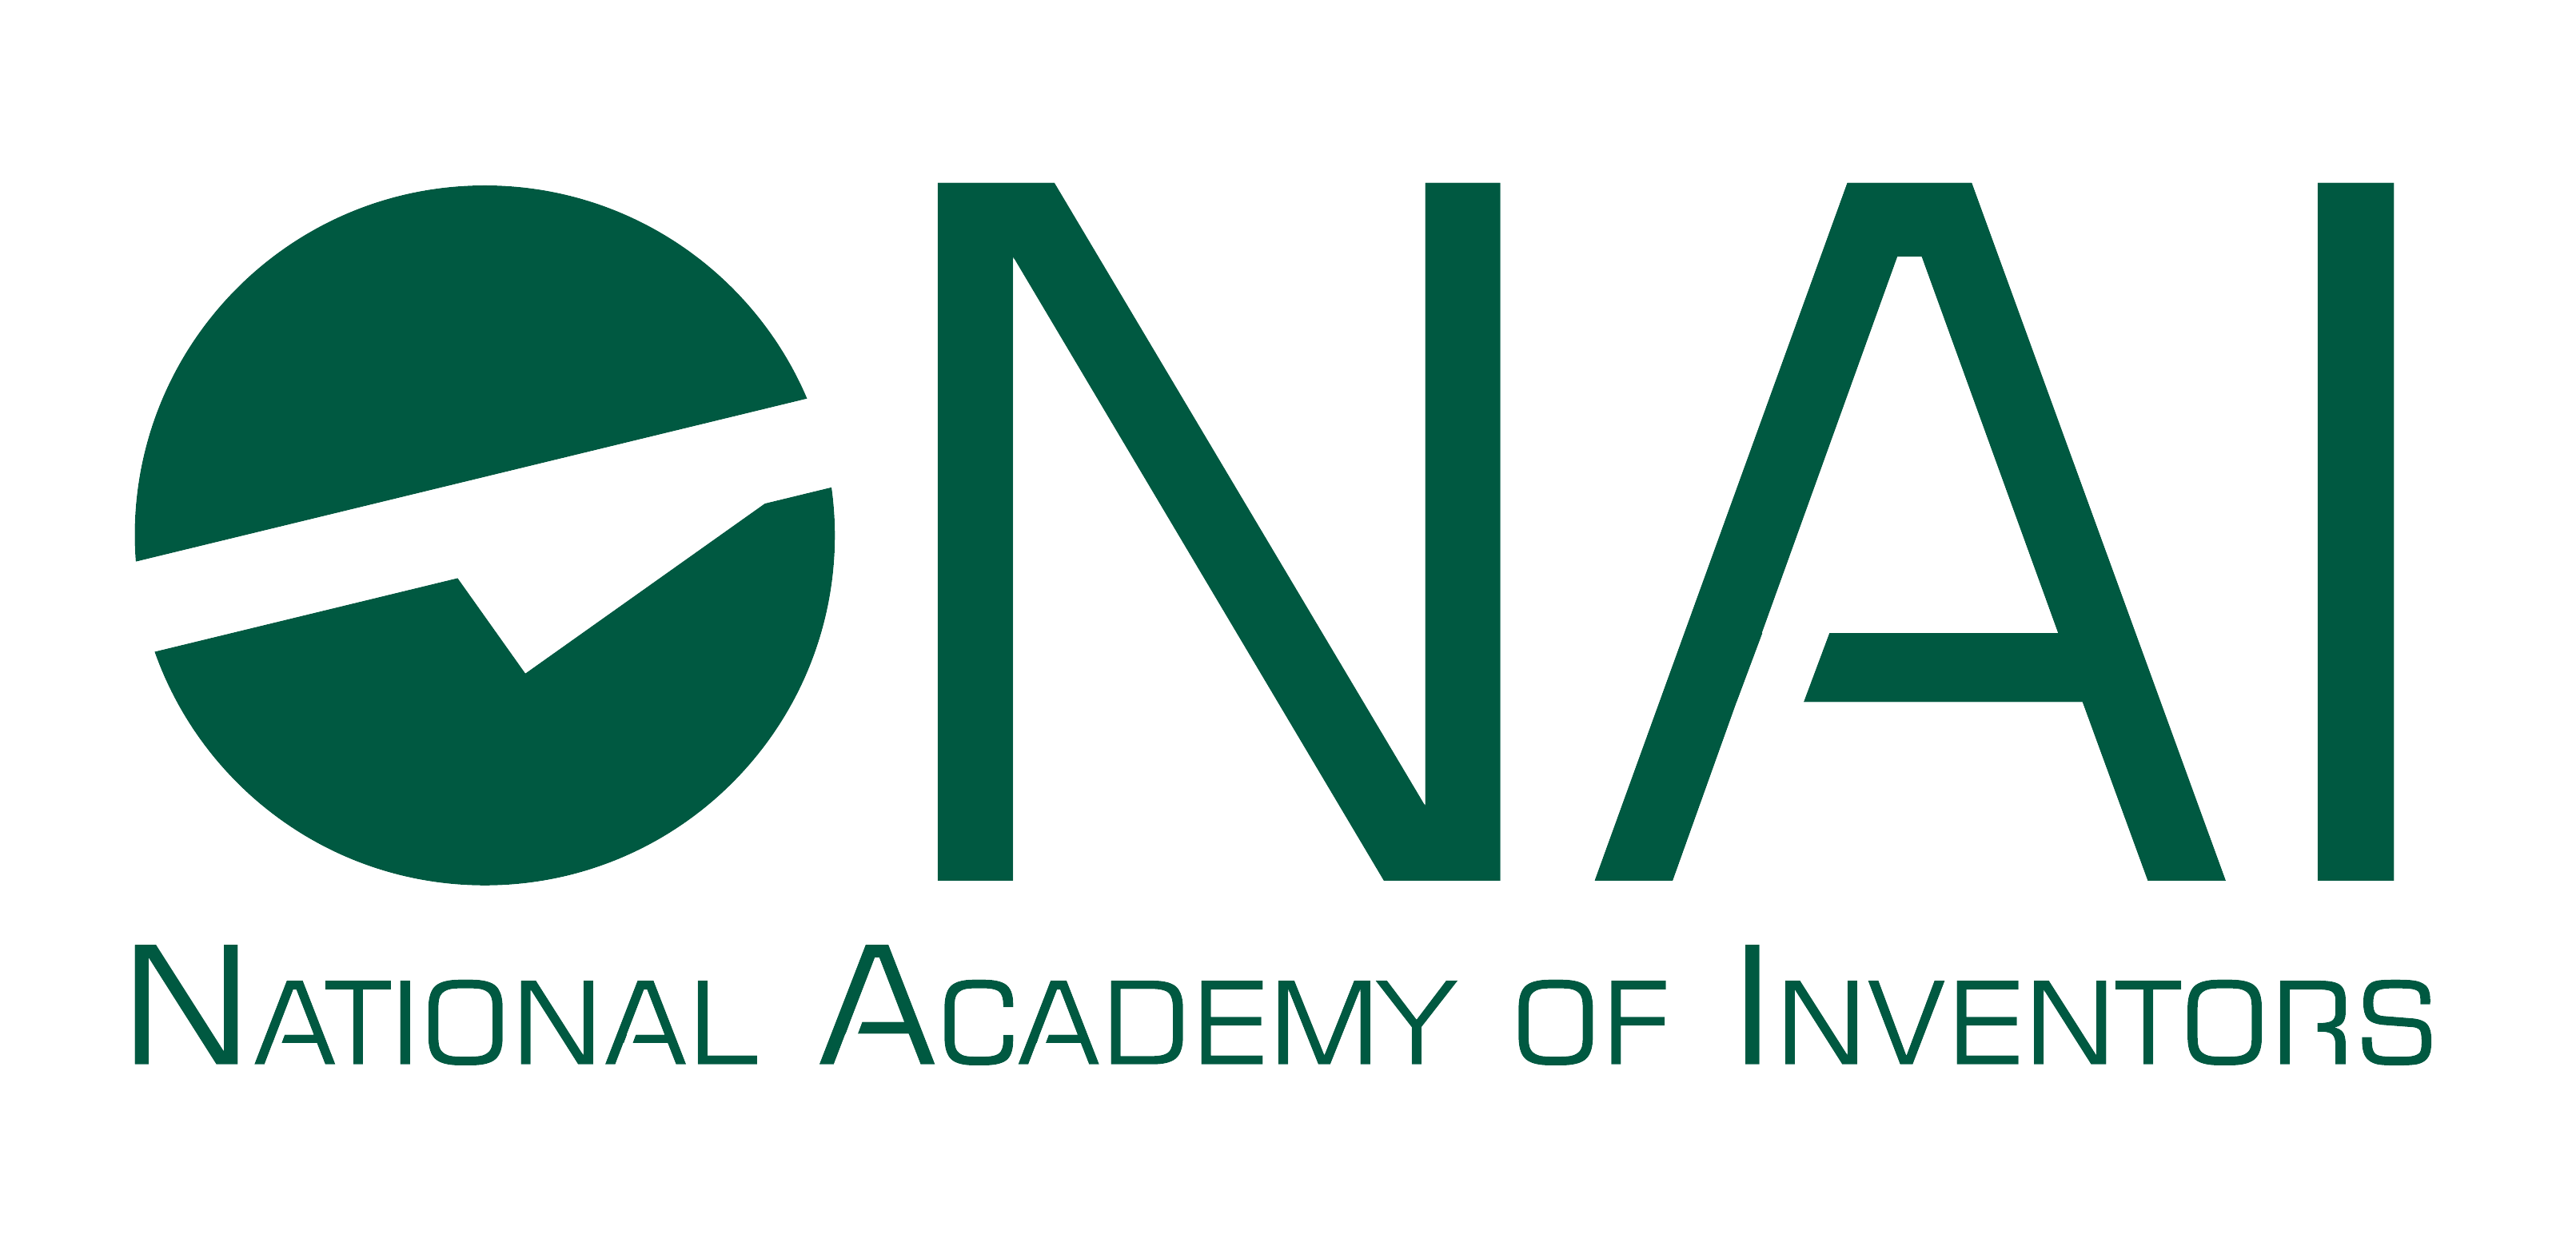 National Academy of Inventors Announces Election of 2022 Class of Fellows